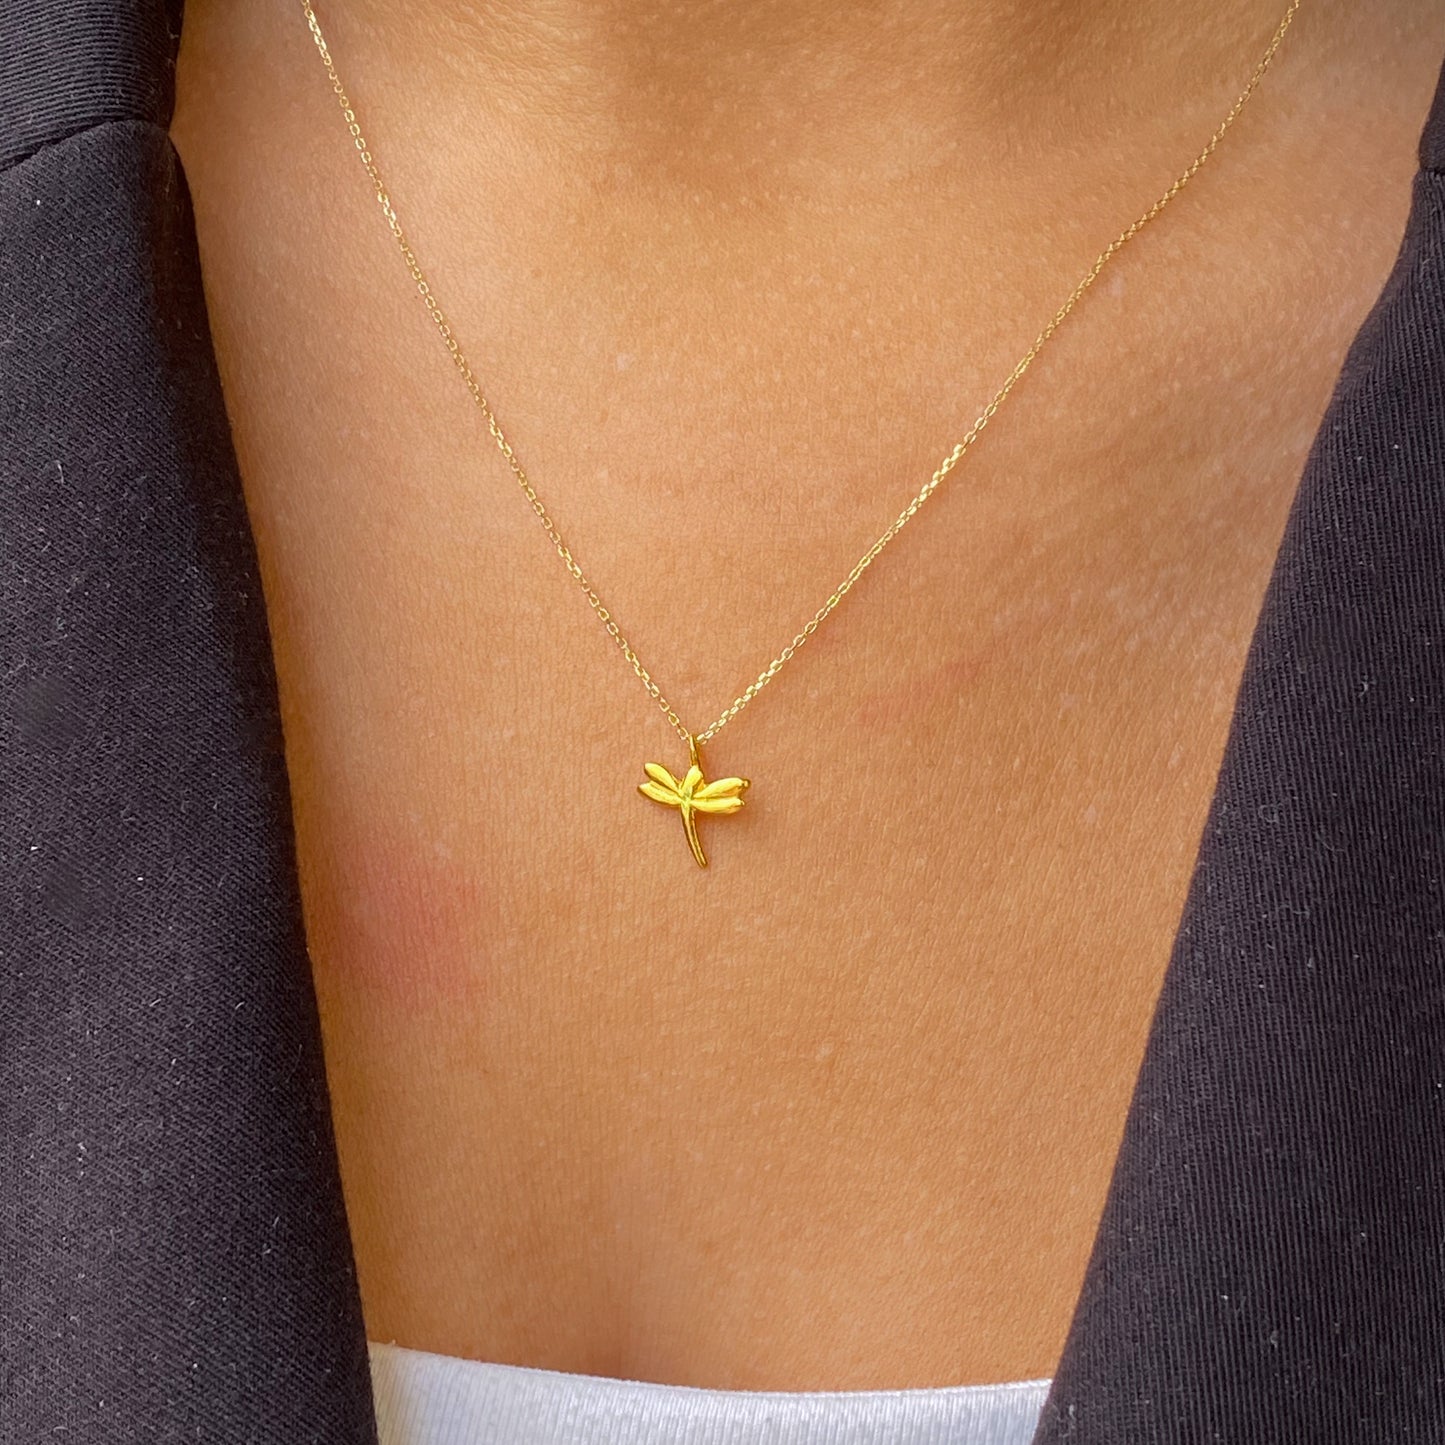 9ct Gold Darling Dragonfly Necklace - John Ross Jewellers